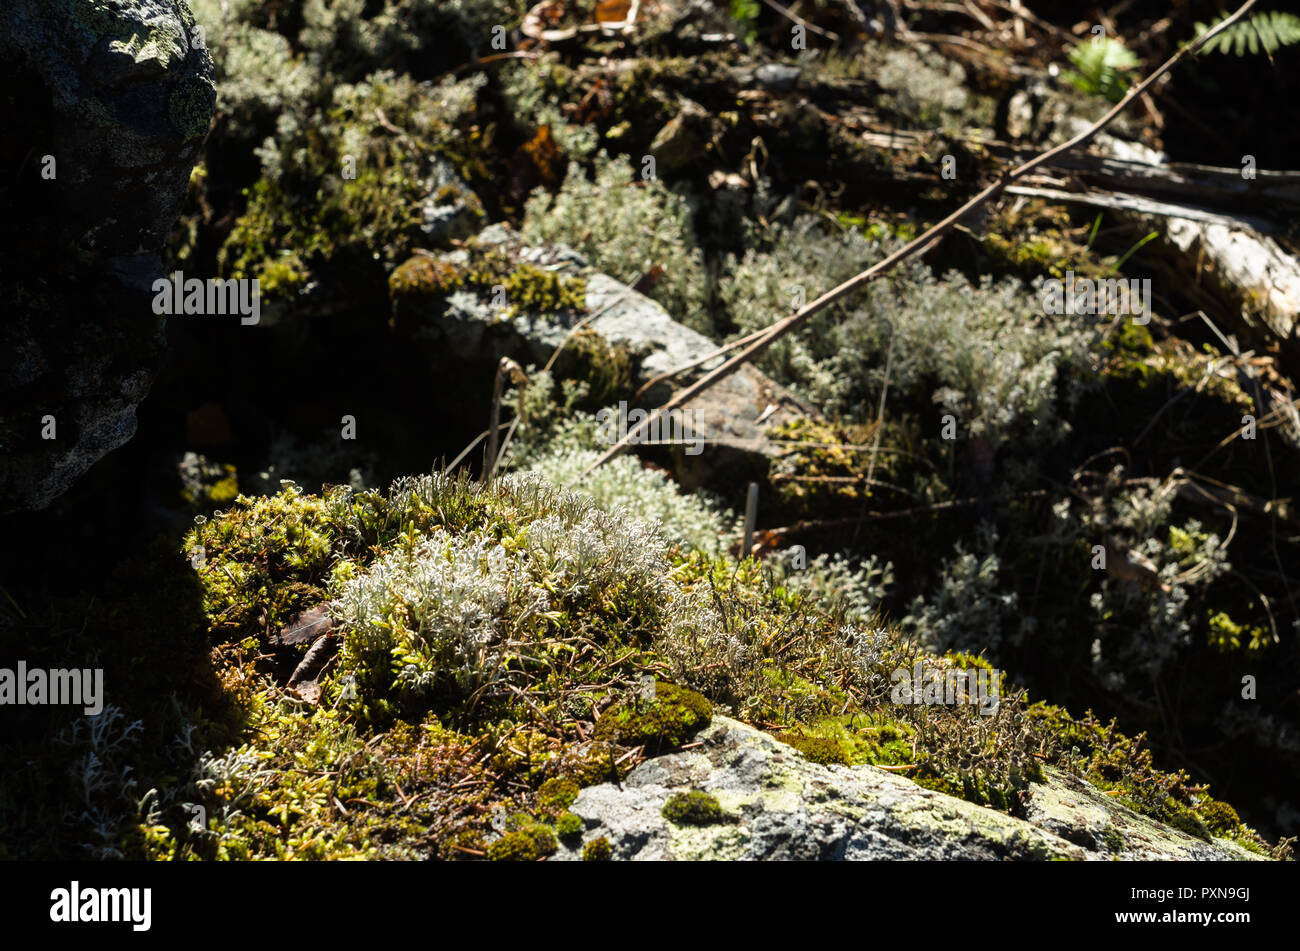 Clumps of moss and lichens mixed on small rocks. Stock Photo